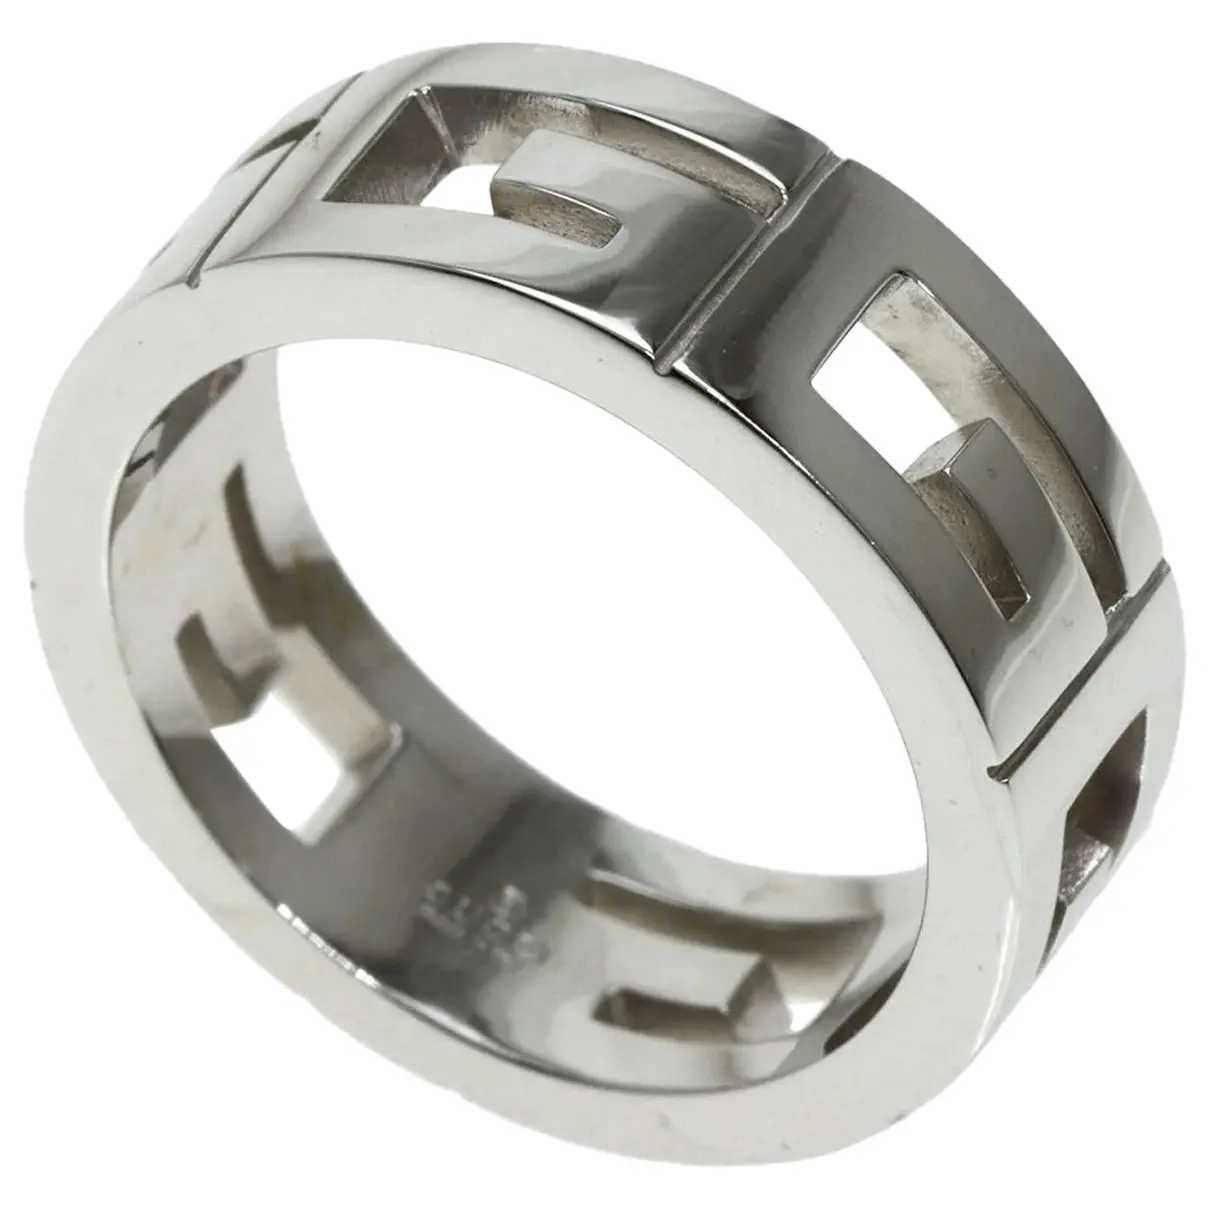 White gold ring Gucci